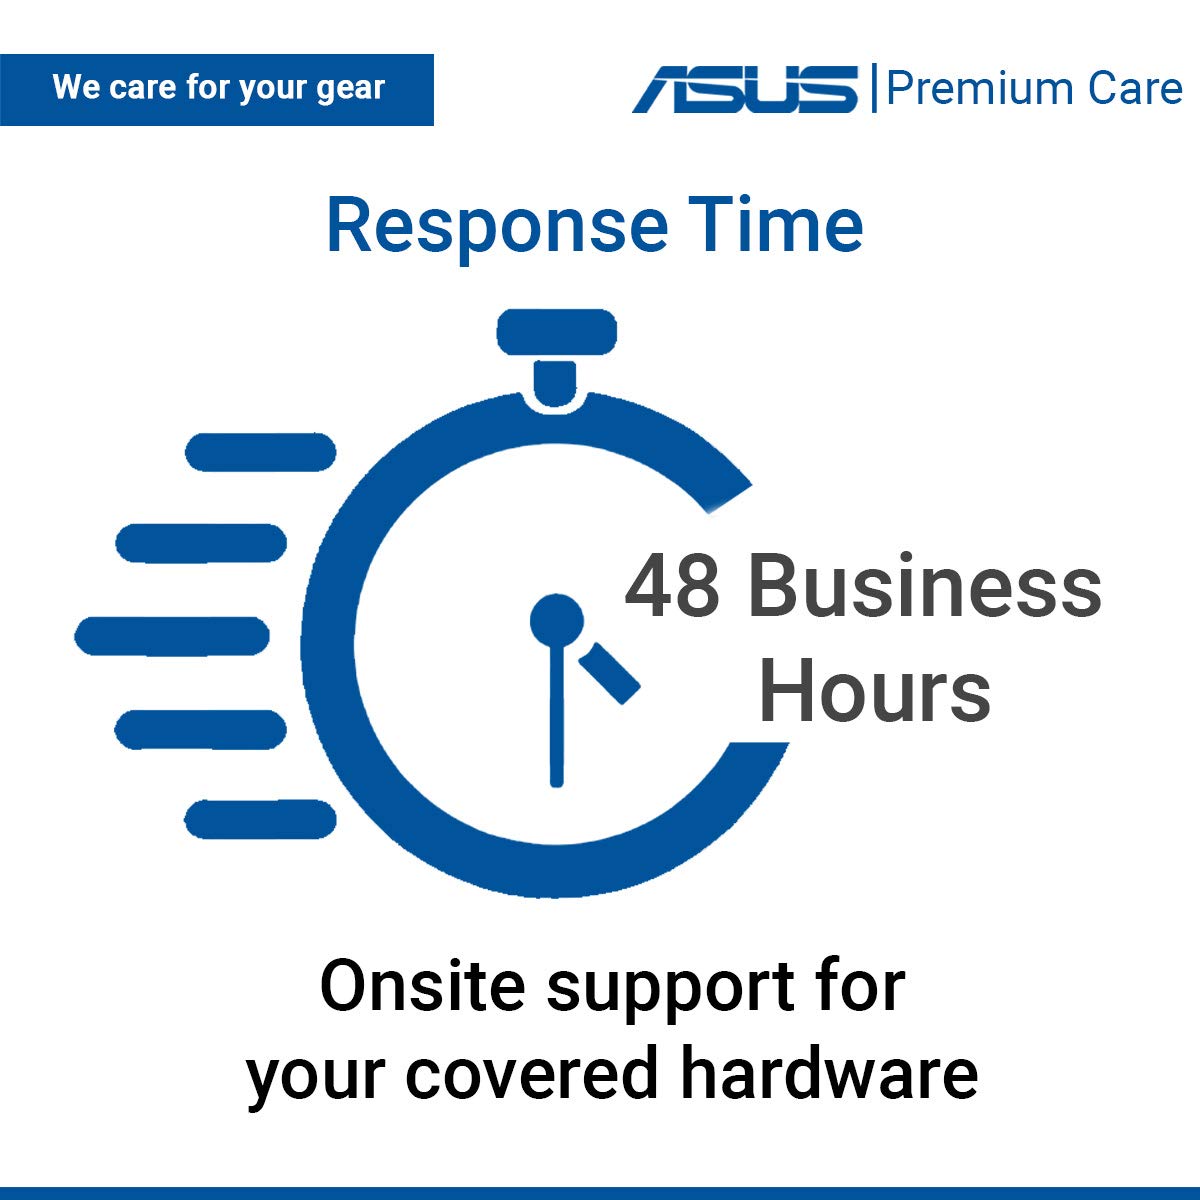 ASUS Premium Care 1 Year Extended Warranty & 2 Year Accidental Damage Protection Pack with Onsite Service for Chromebook Vivobook Zenbook Series Laptops